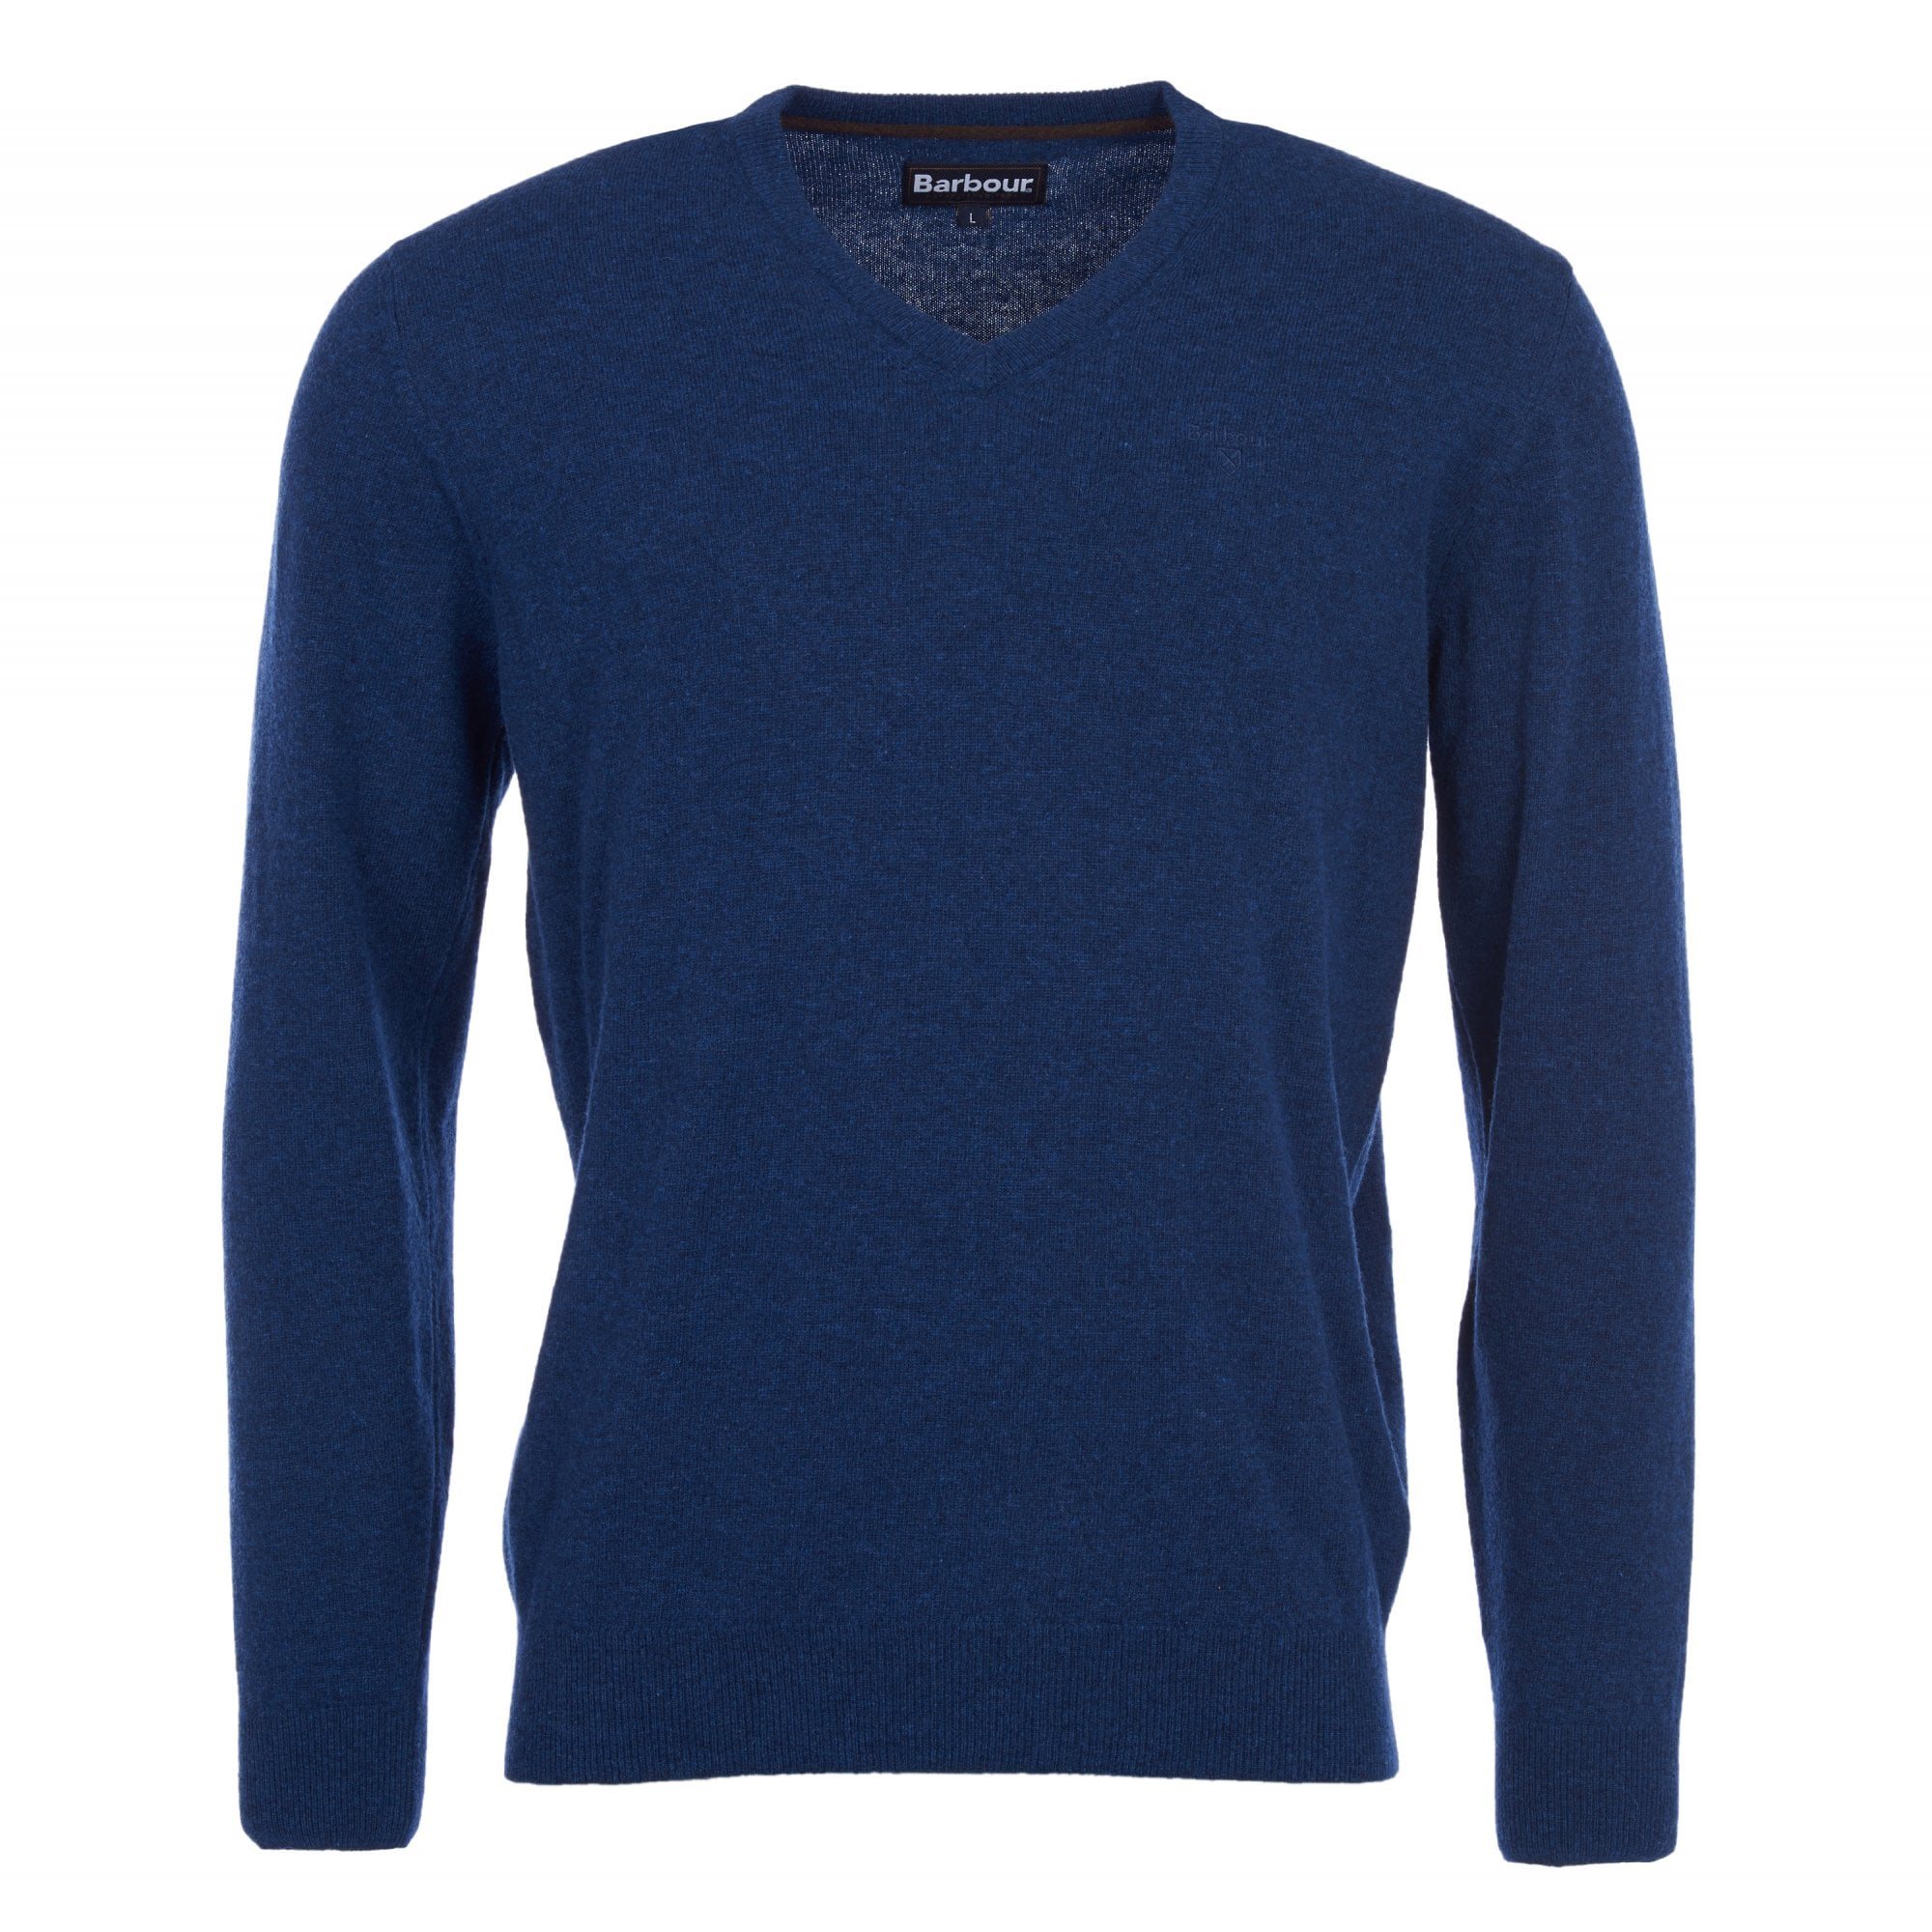 Barbour Lambswool Jumper V Neck - Robinsons Equestrian